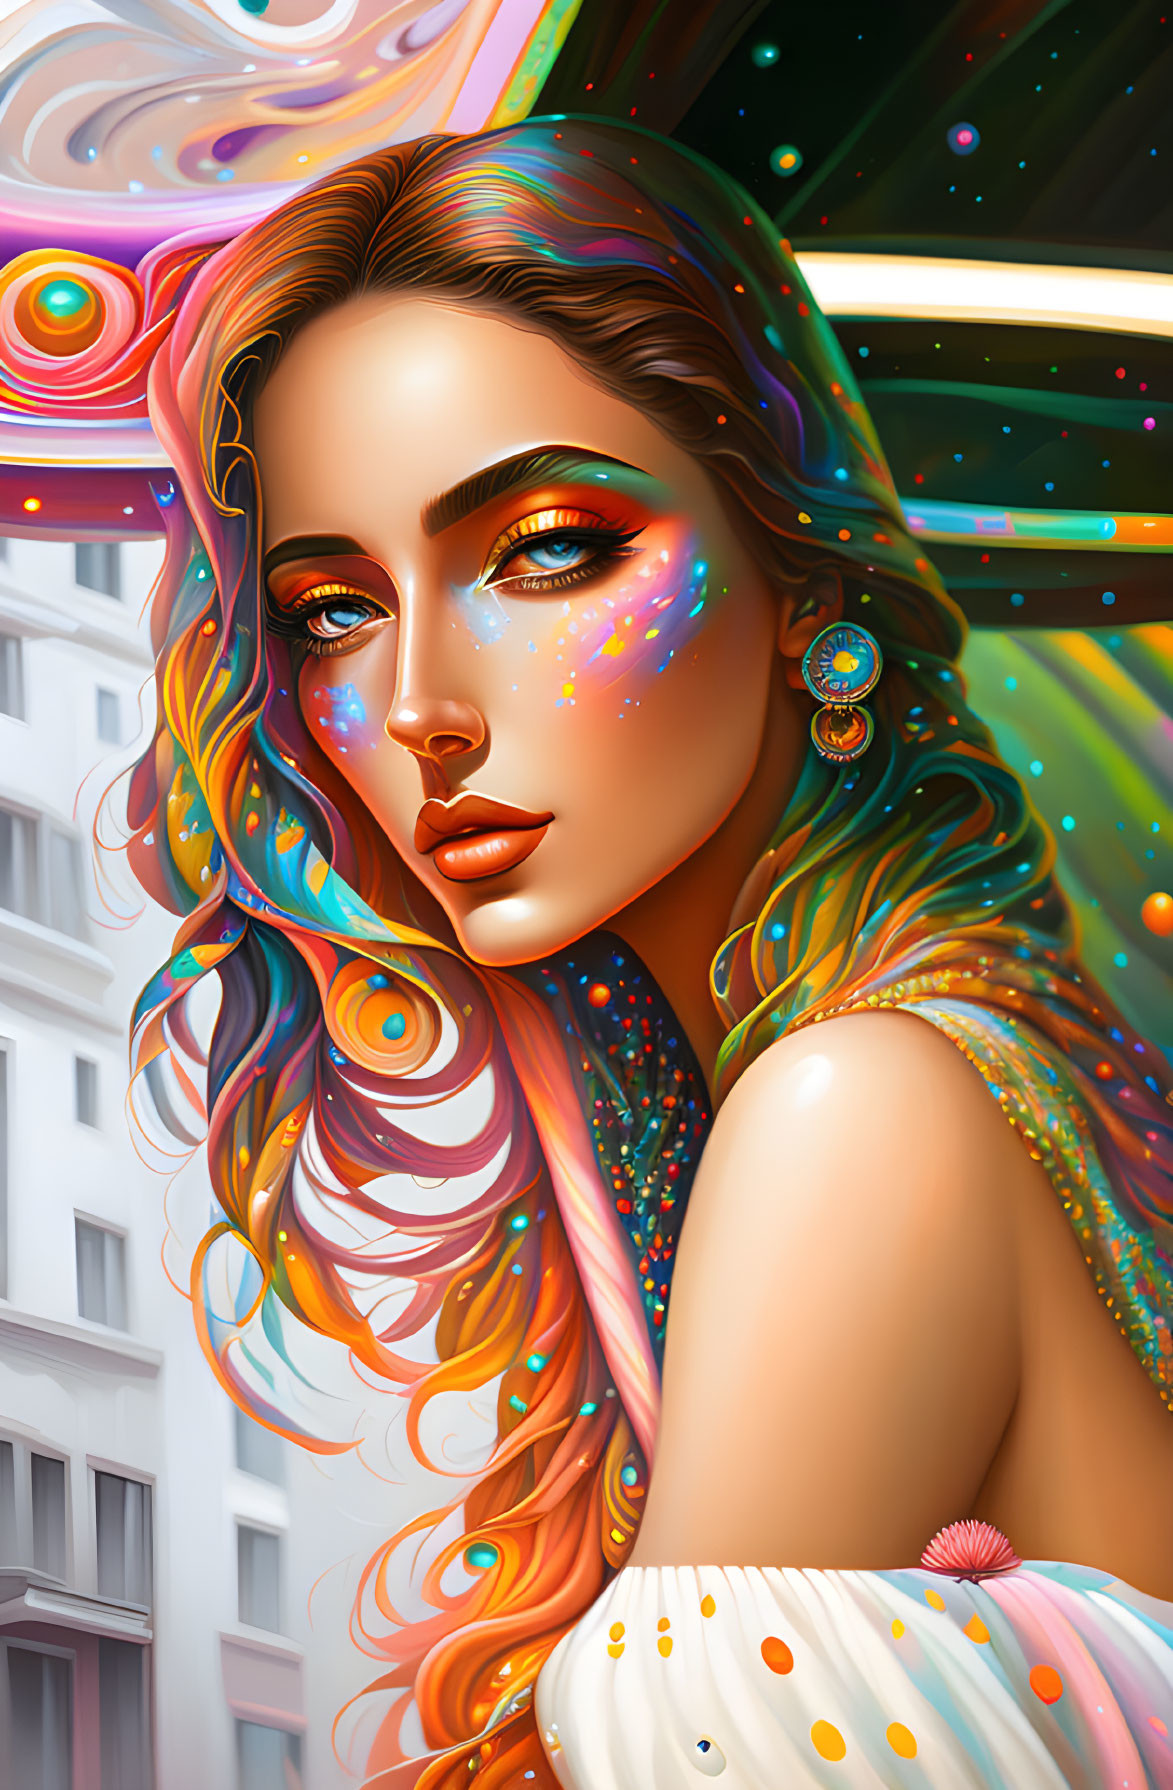 Vibrant digital artwork: Woman with cosmic makeup and flowing hair in urban setting